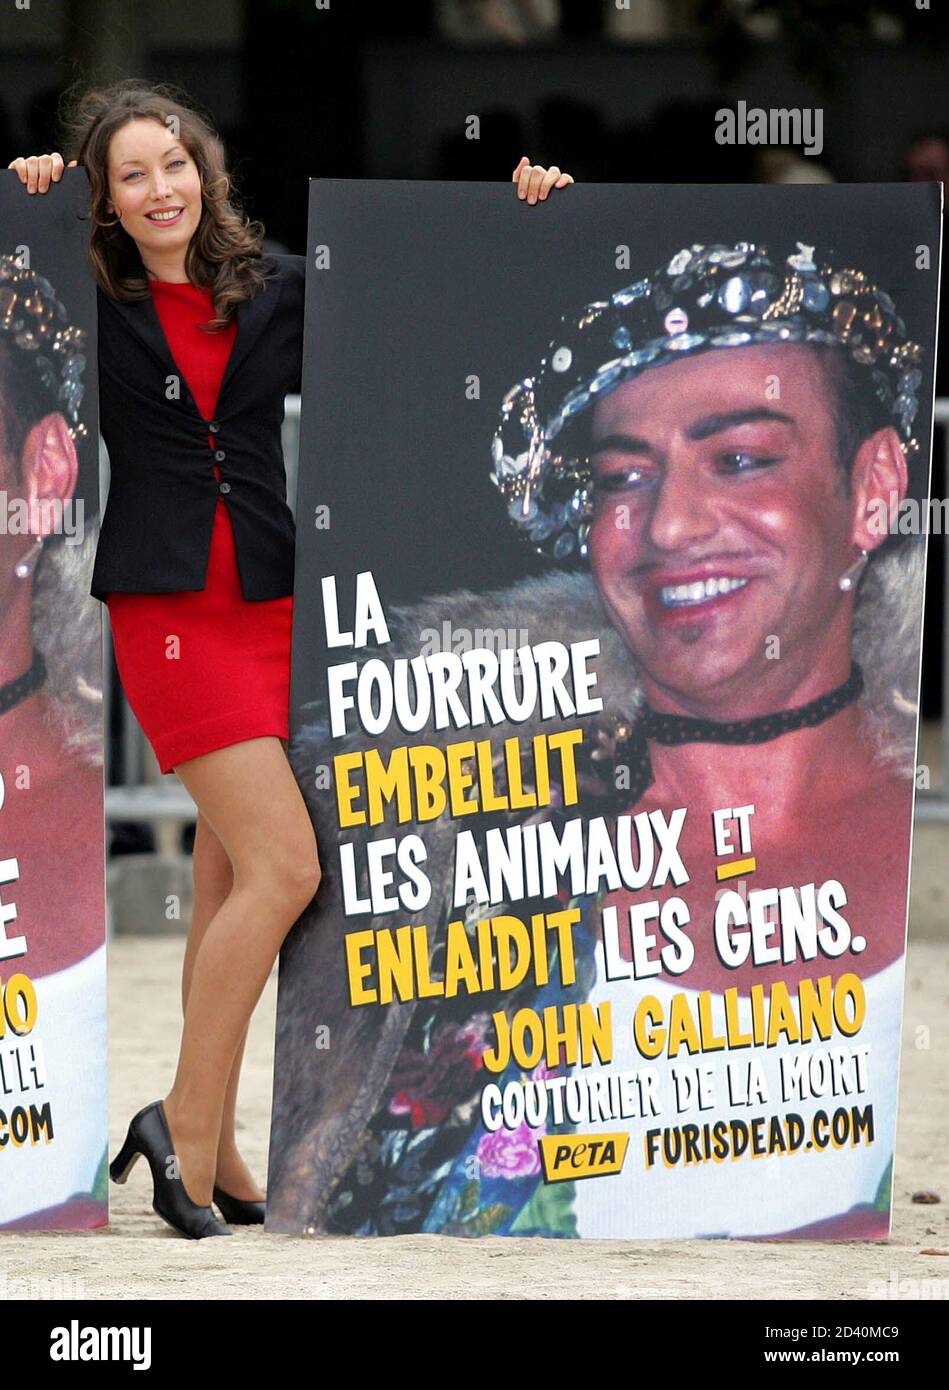 An activist of PETA association (People for the Ethical Treatment of Animals)  demonstrate outside British designer John Galliano's Spring-Summer 2005  ready-to-wear fashion shown in Paris, October 5, 2004. Posters read 